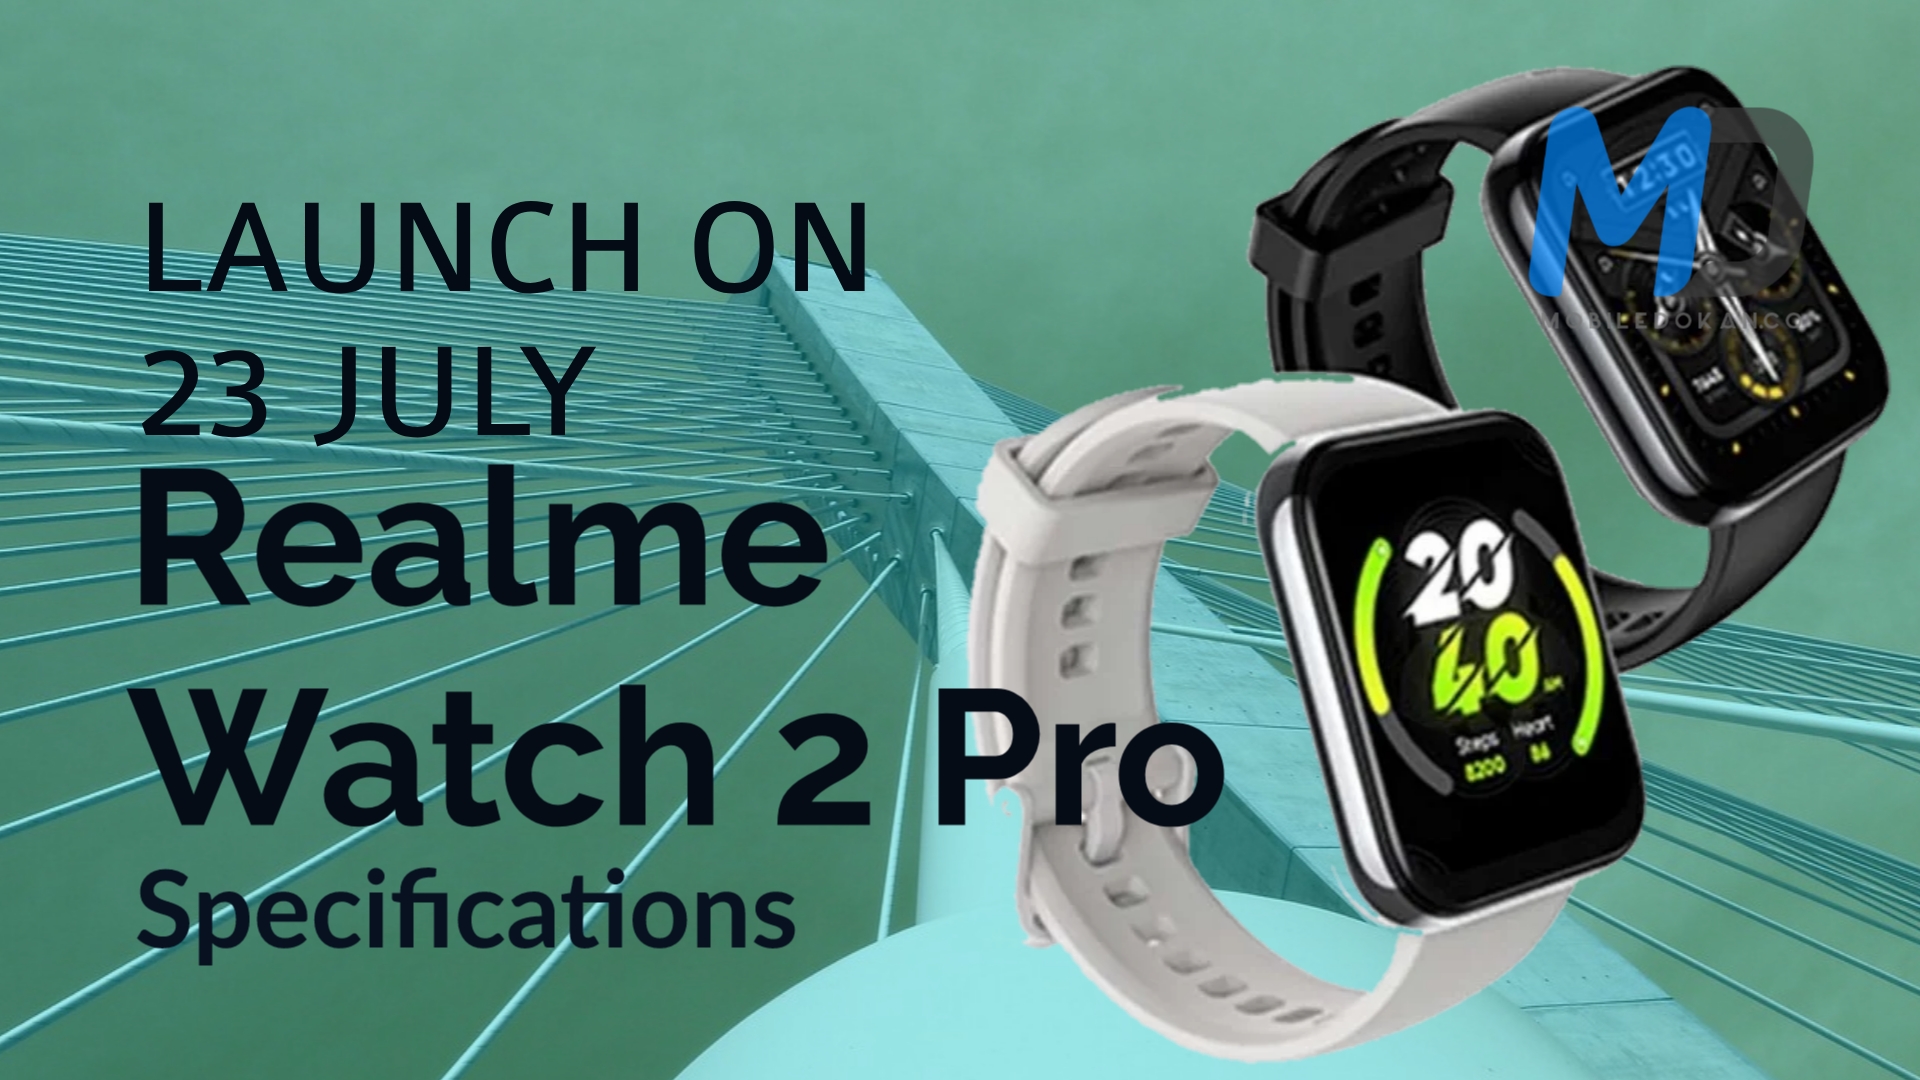 Realme Watch 2 Pro launch in India, scheduled for July 23